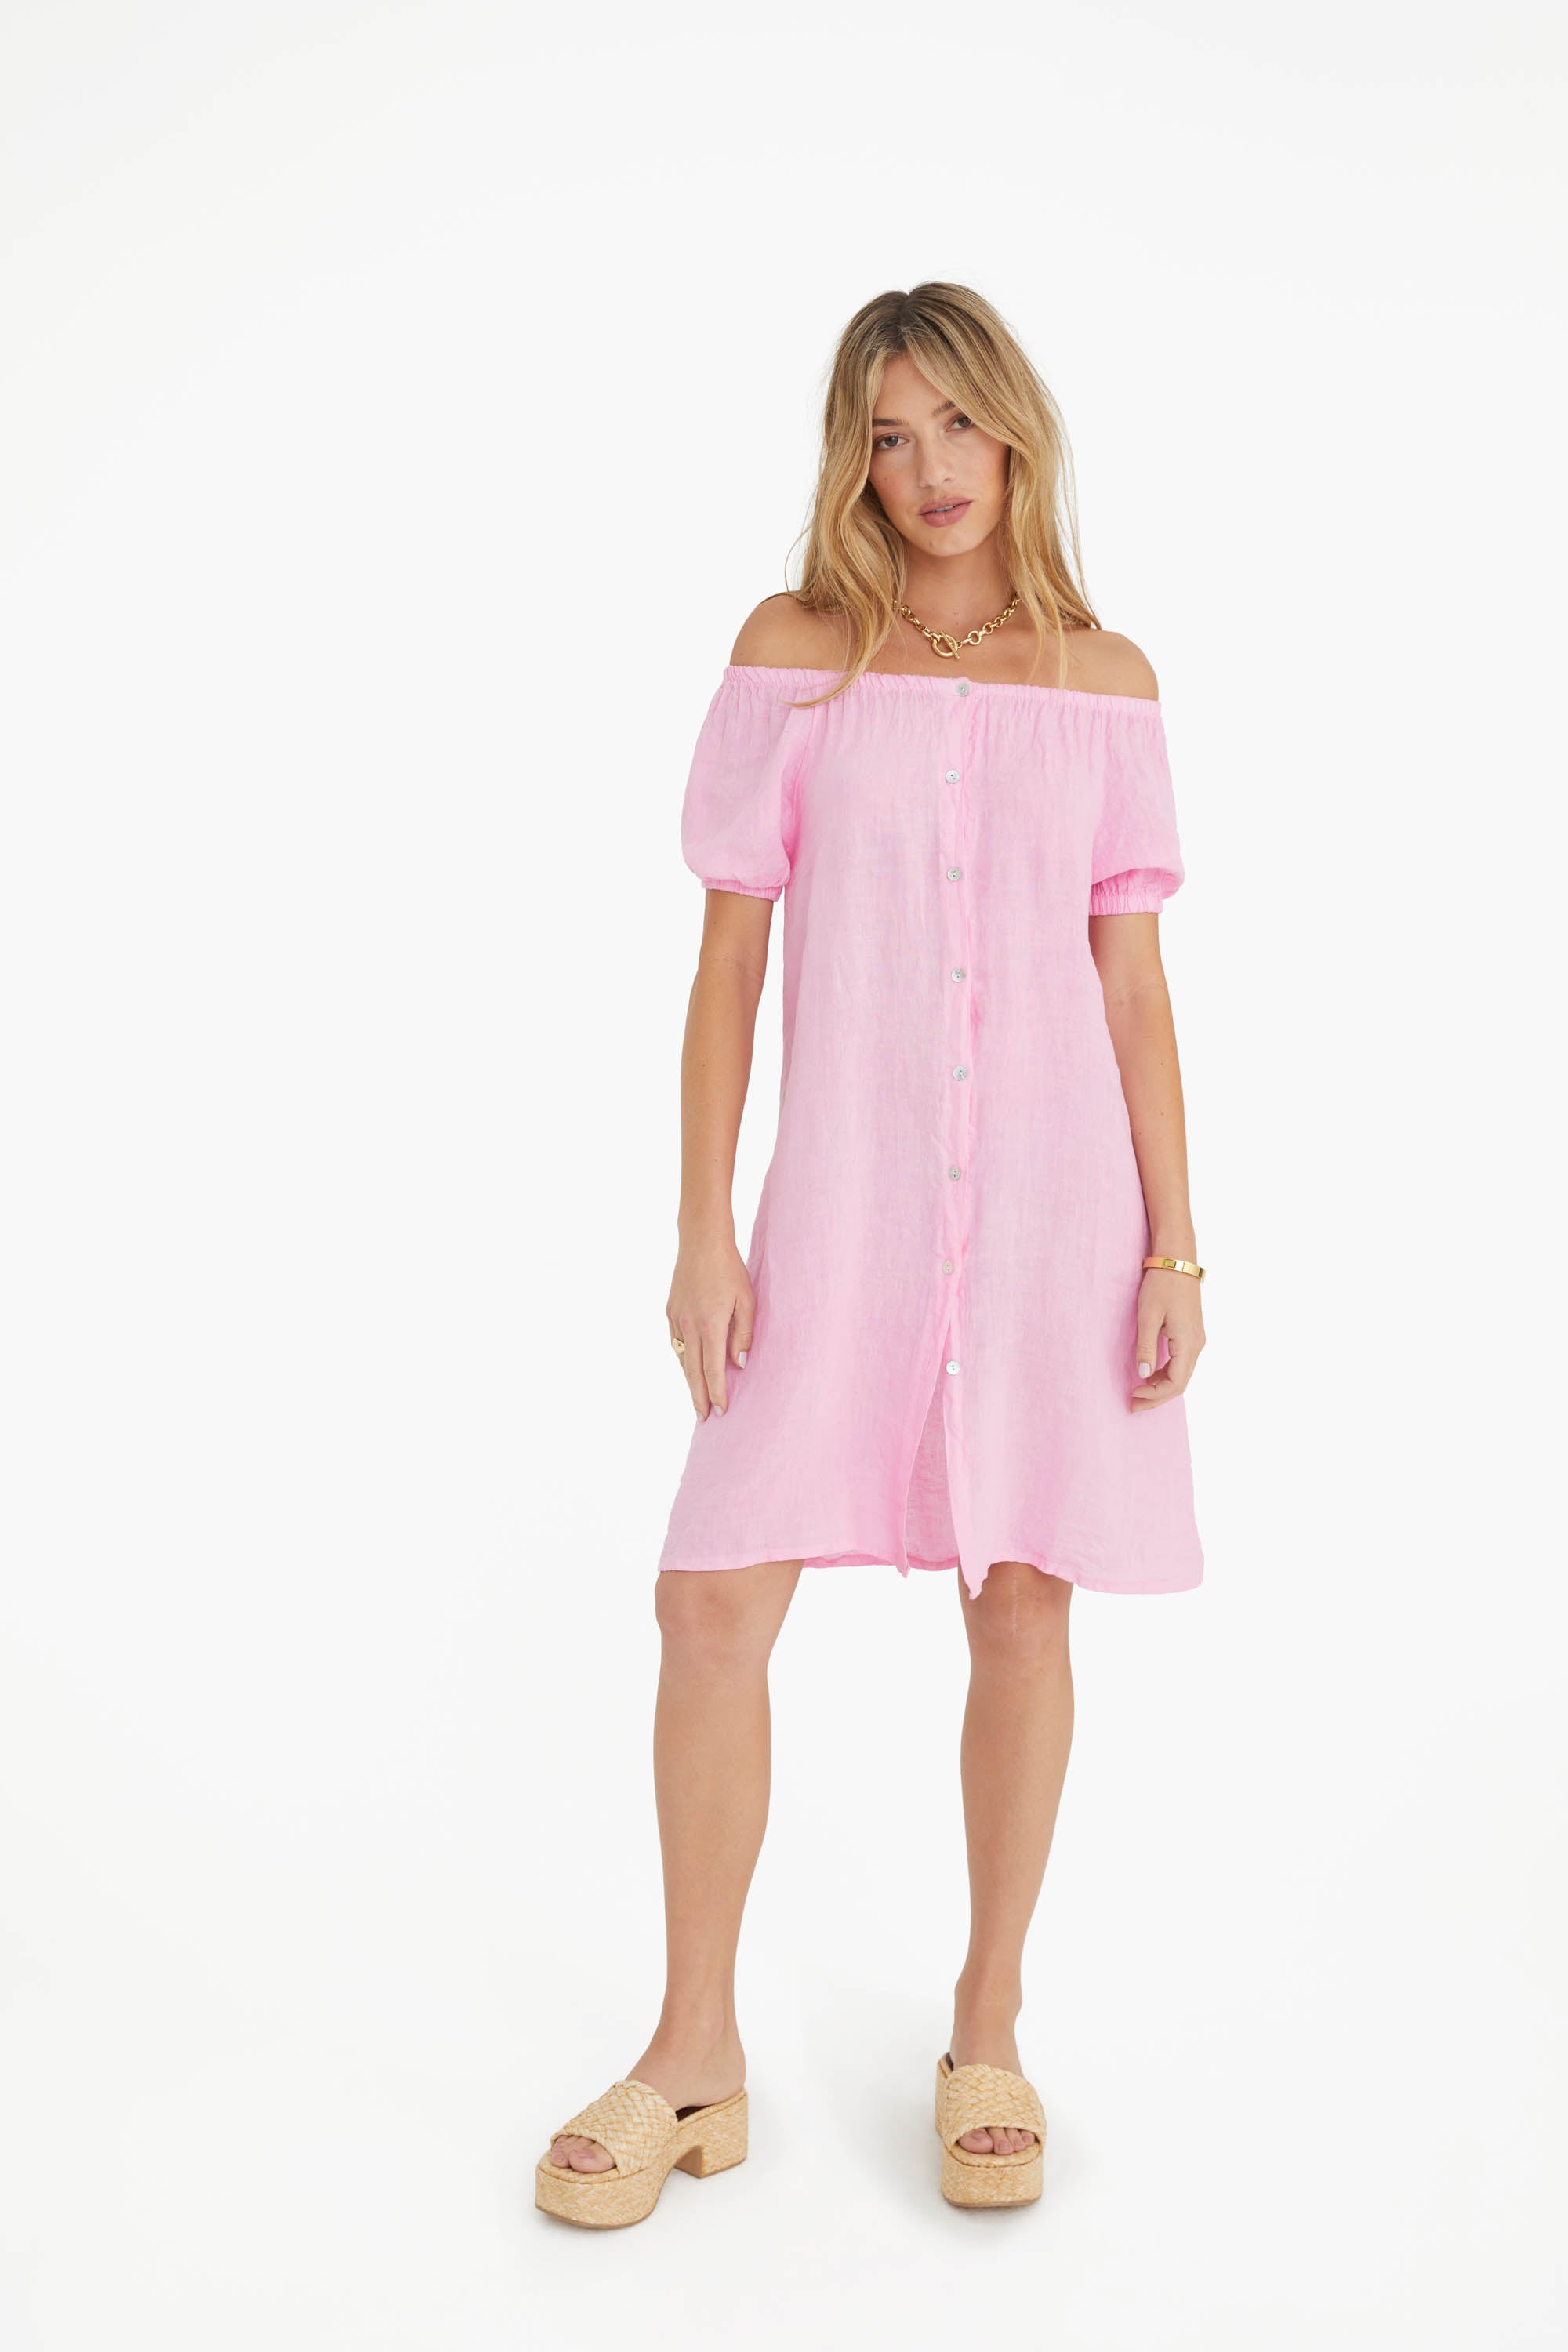 The Antibes Linen Dress in Rose